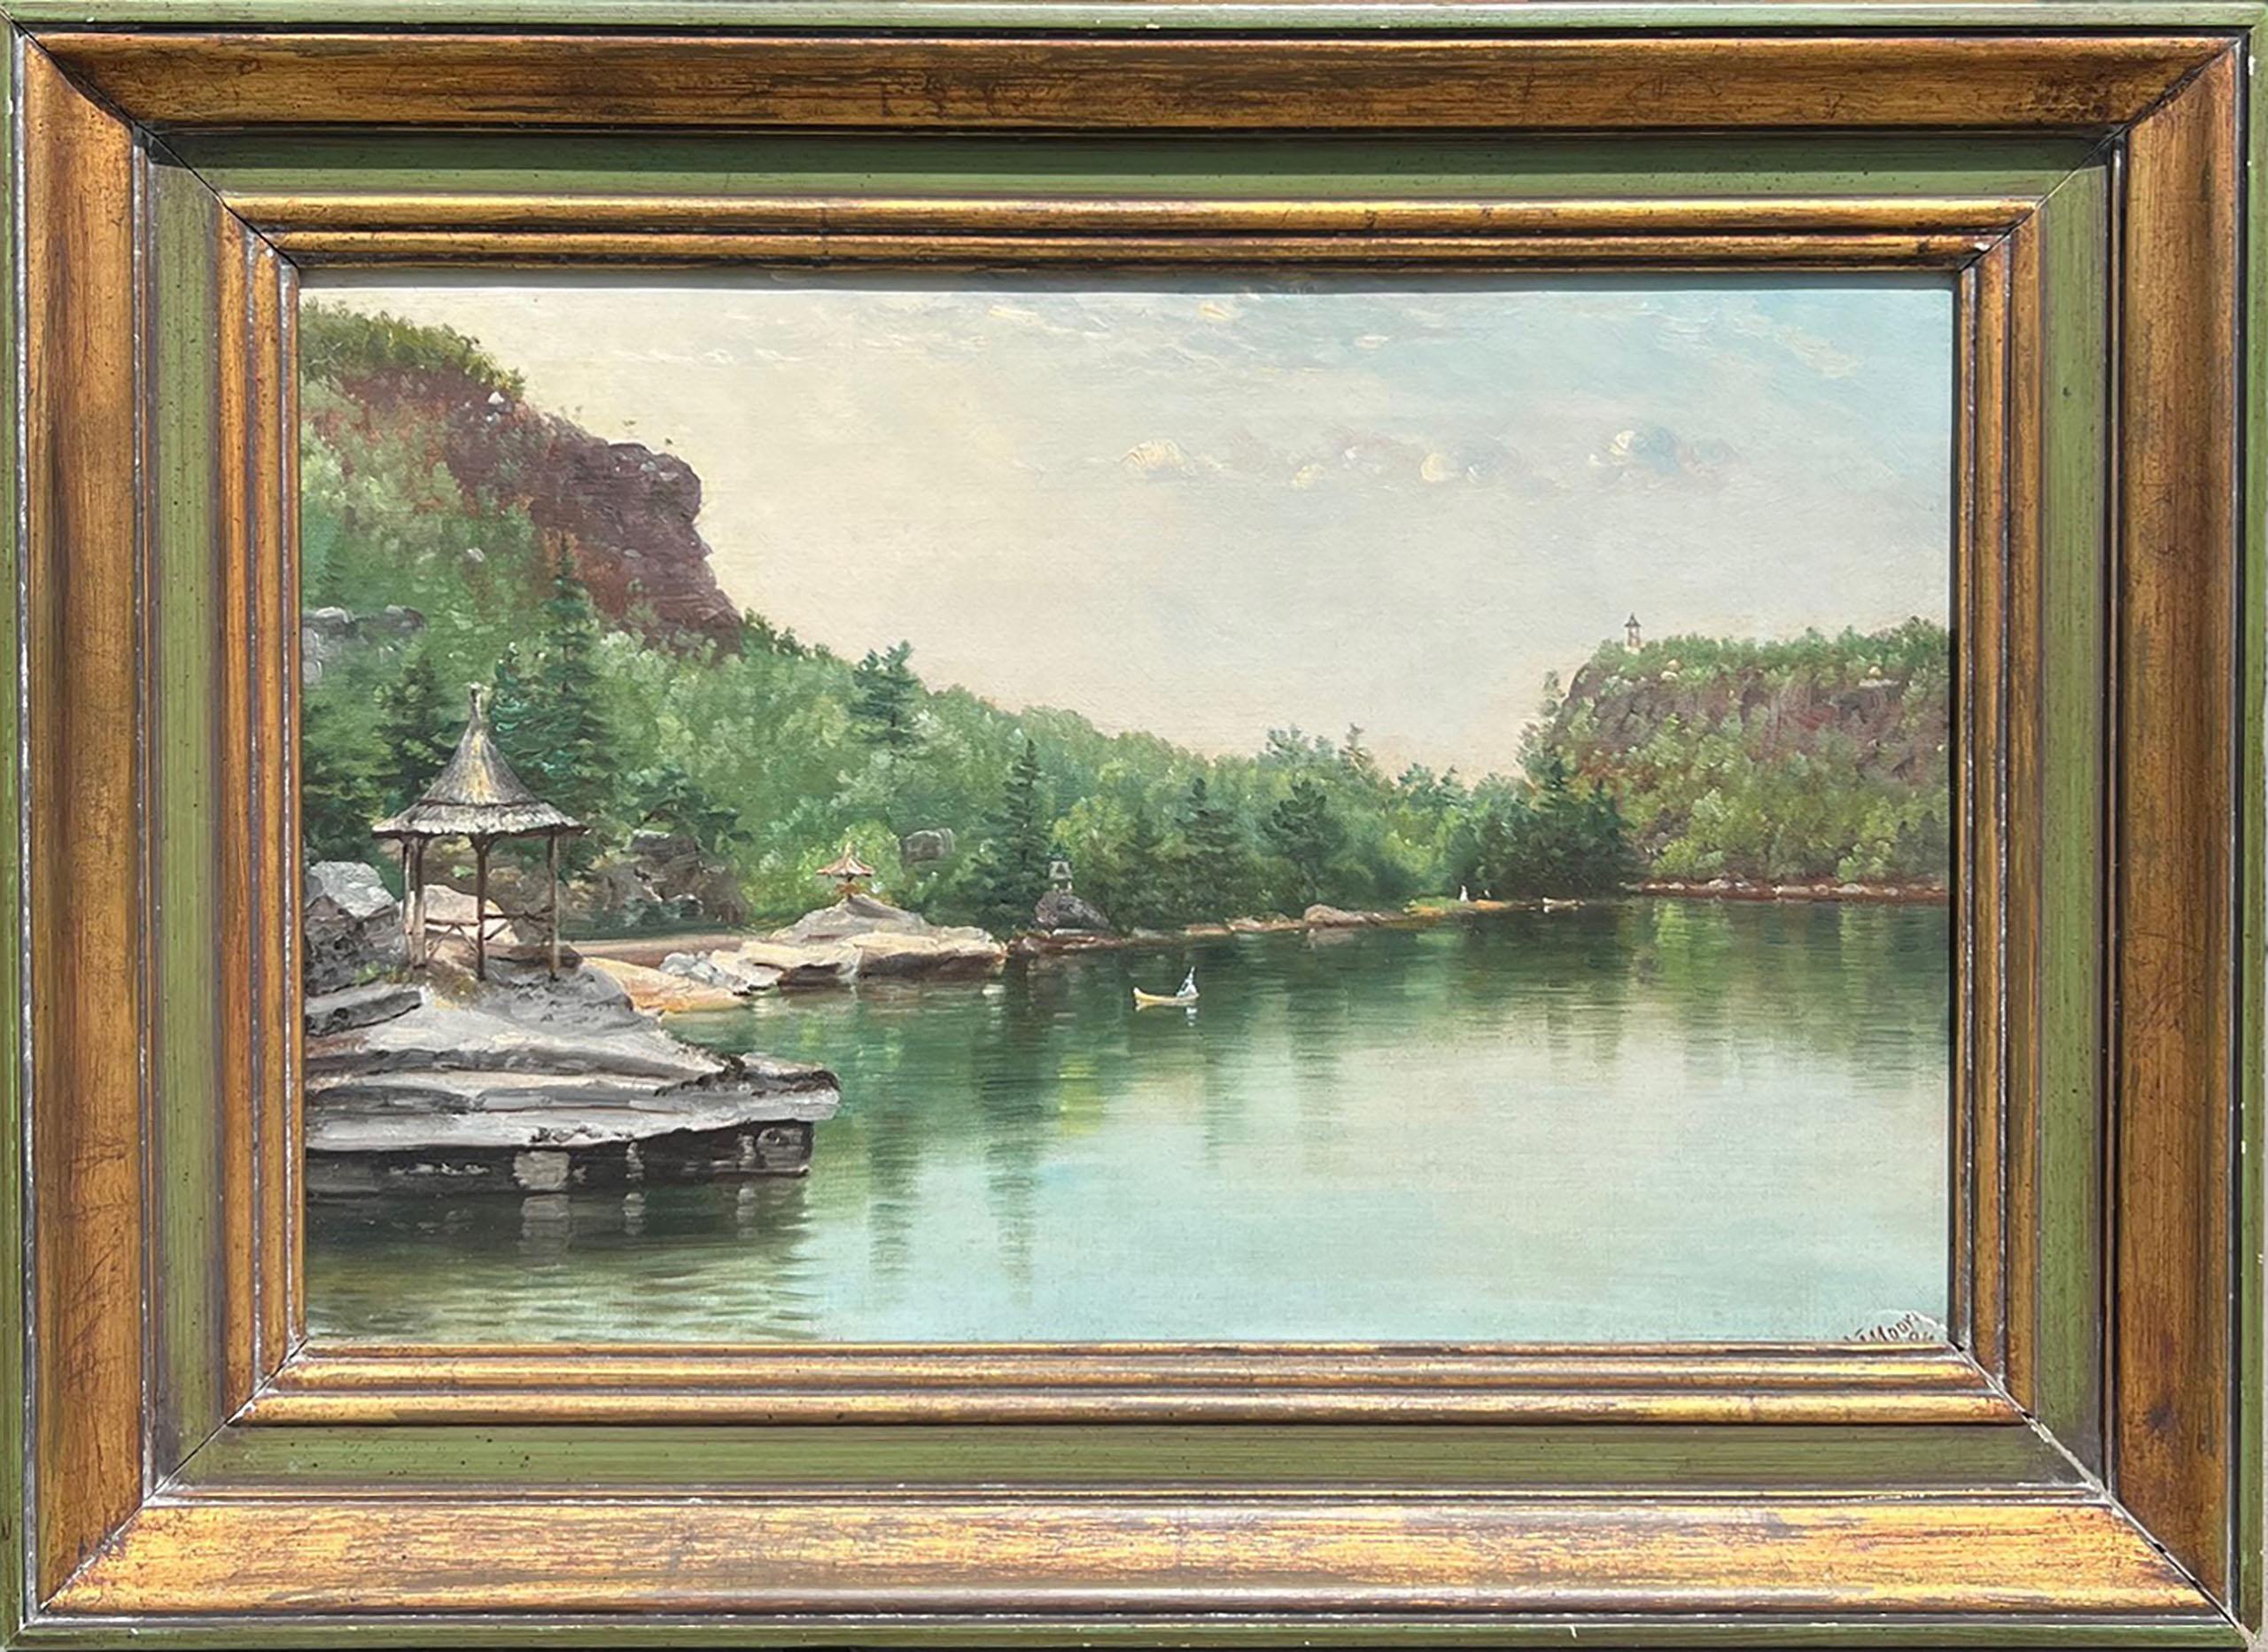 Lake Mohonk by Hudson River Artist Nelson Augustus Moore (American, 1824-1902)